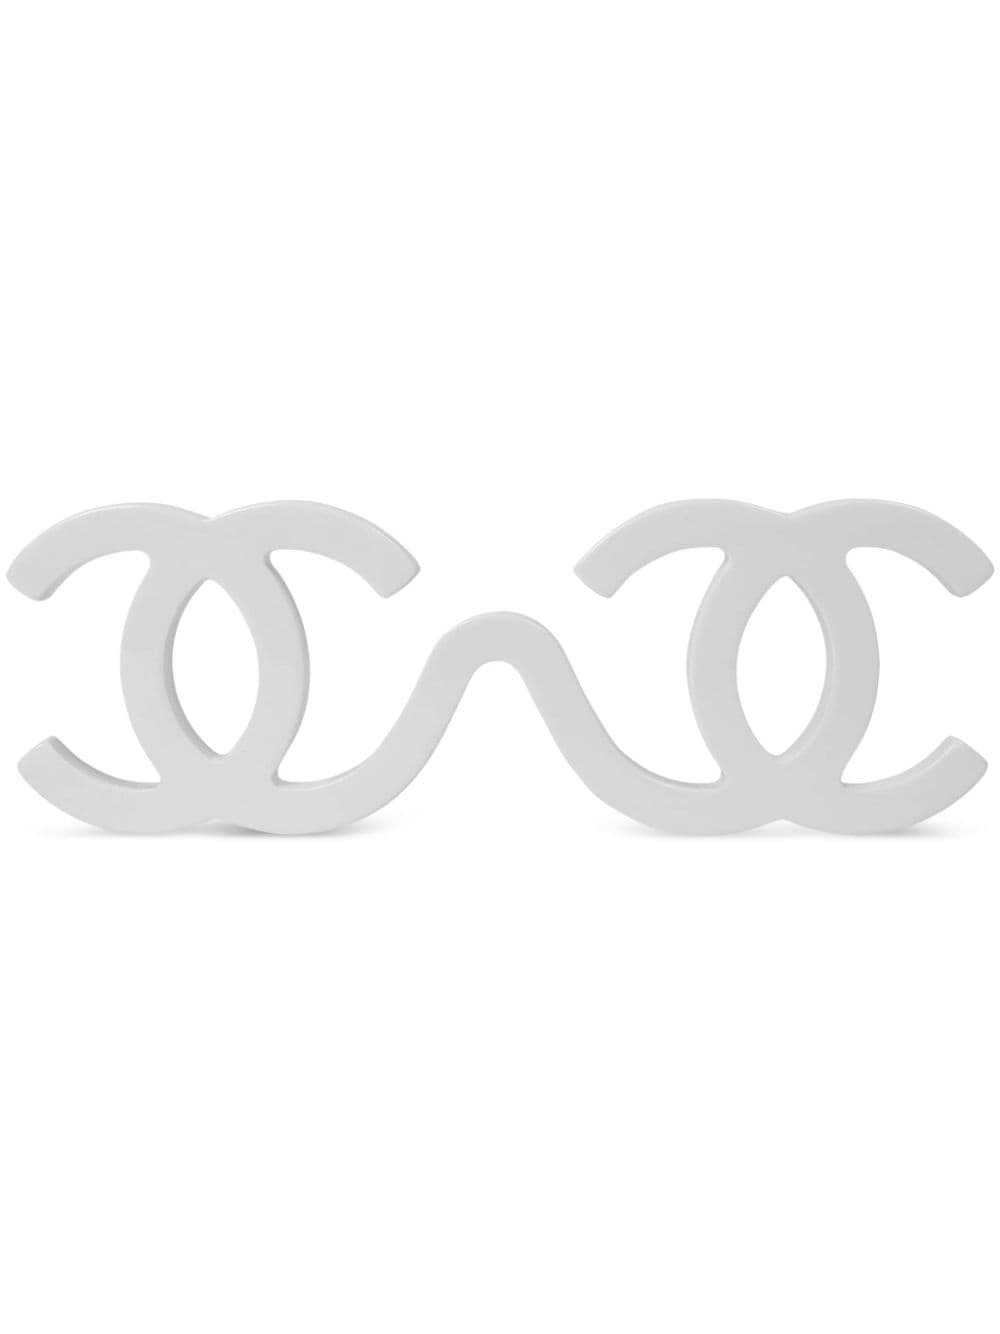 CHANEL Pre-Owned 1994 CC Runway sunglasses - White - image 1